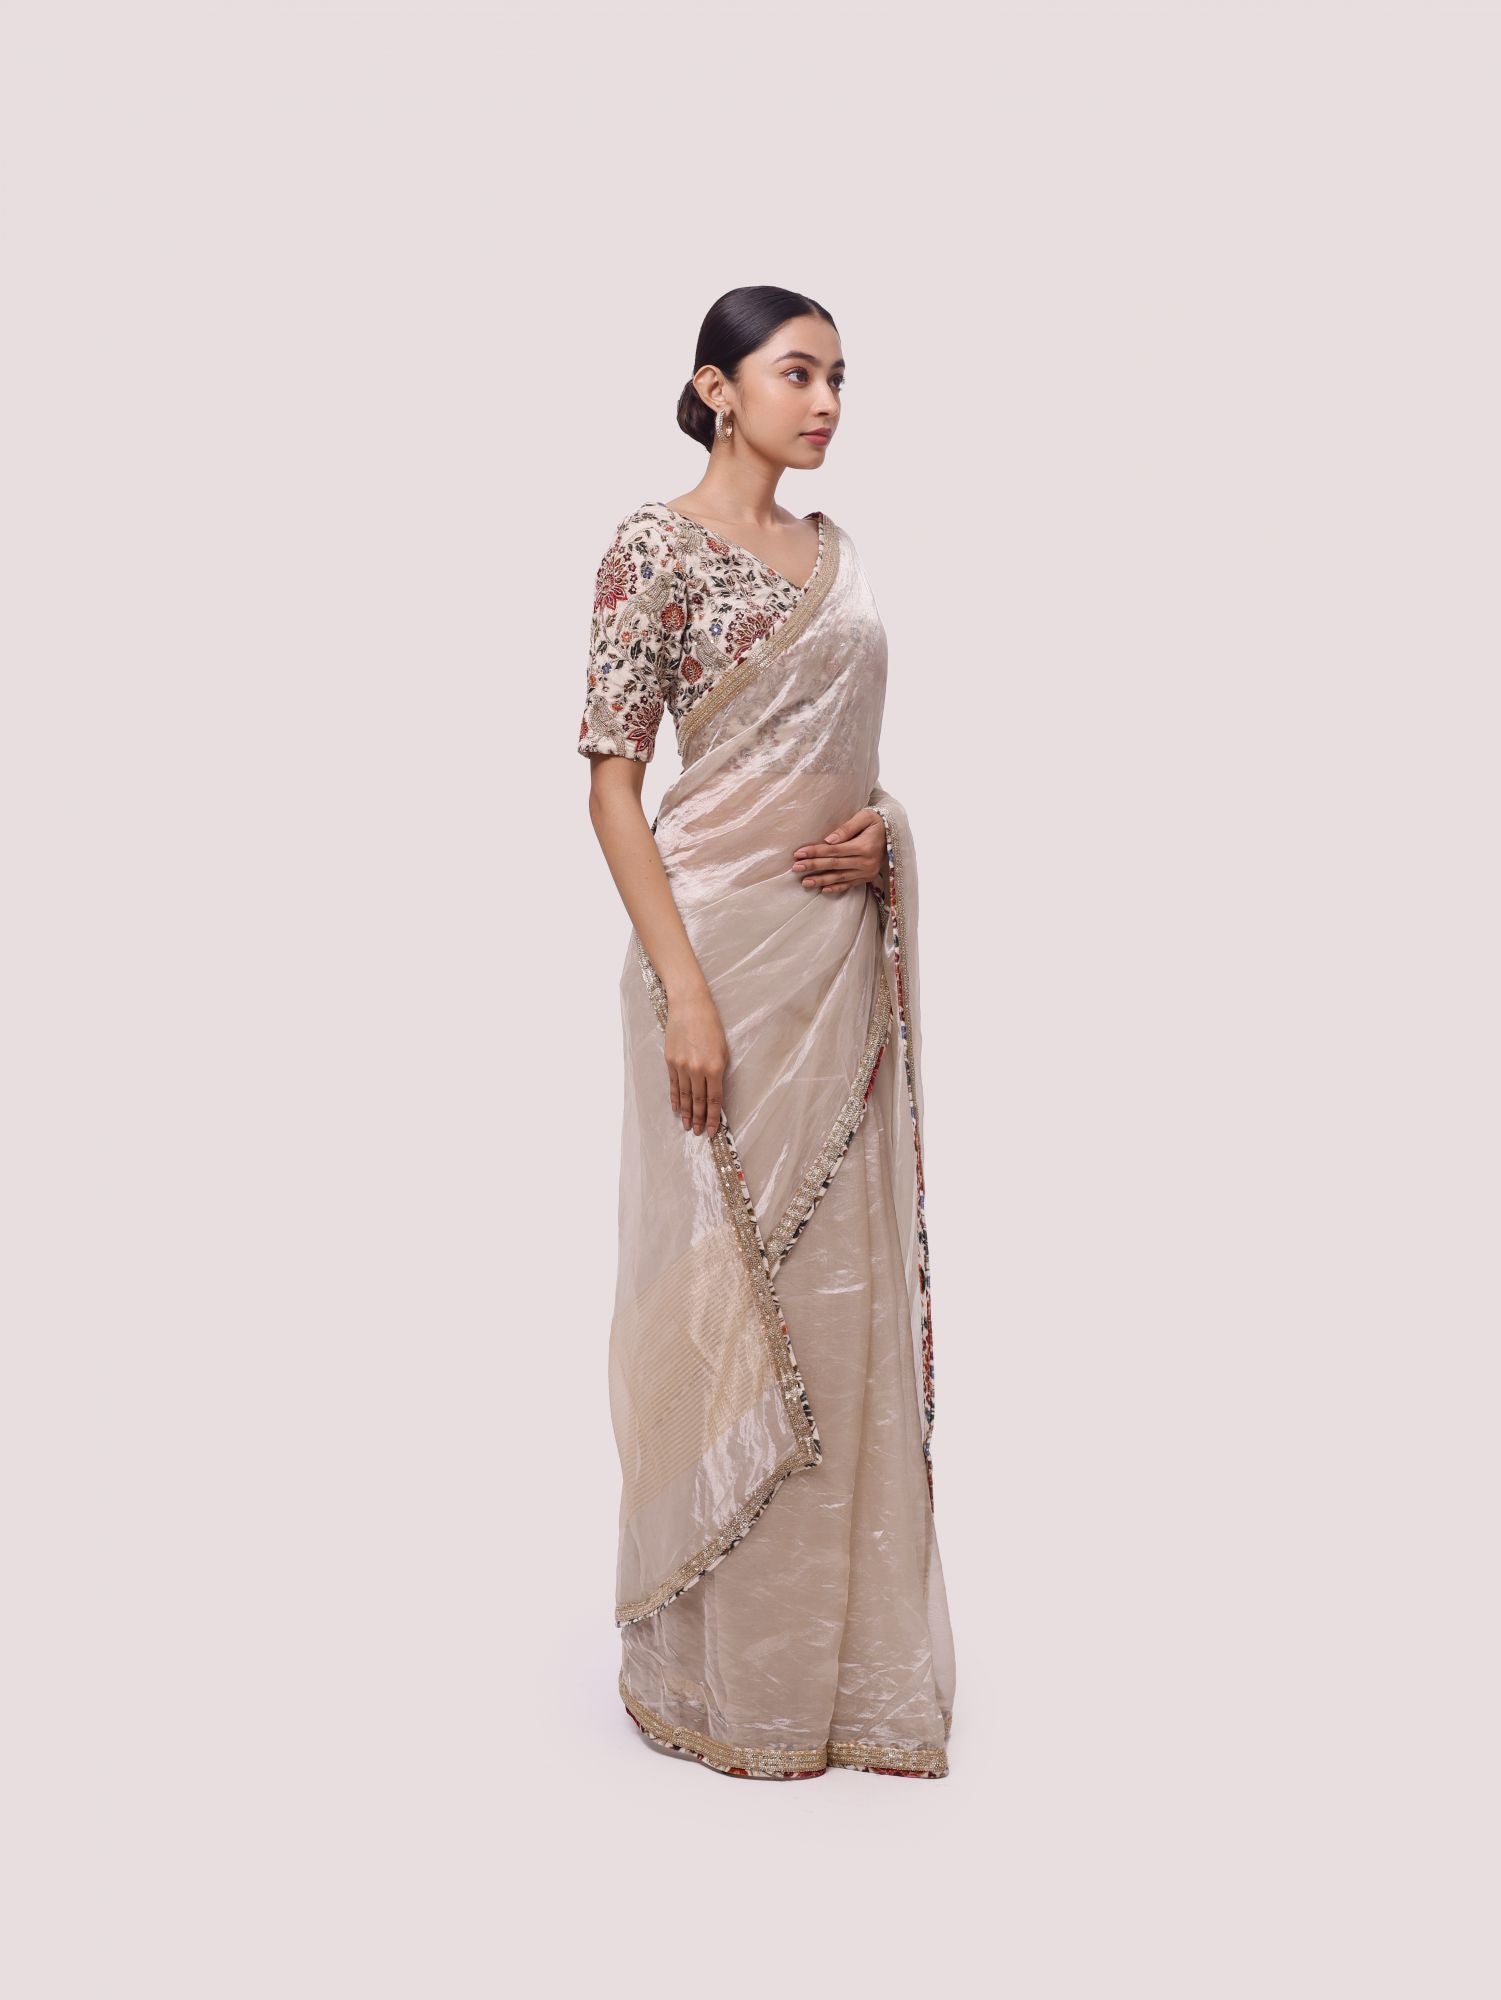 Shop beige handloom tissue saree online in USA with velvet saree blouse. Look your best at parties and weddings in beautiful designer sarees, embroidered sarees, handwoven sarees, silk sarees, organza saris from Pure Elegance Indian saree store in USA.-side